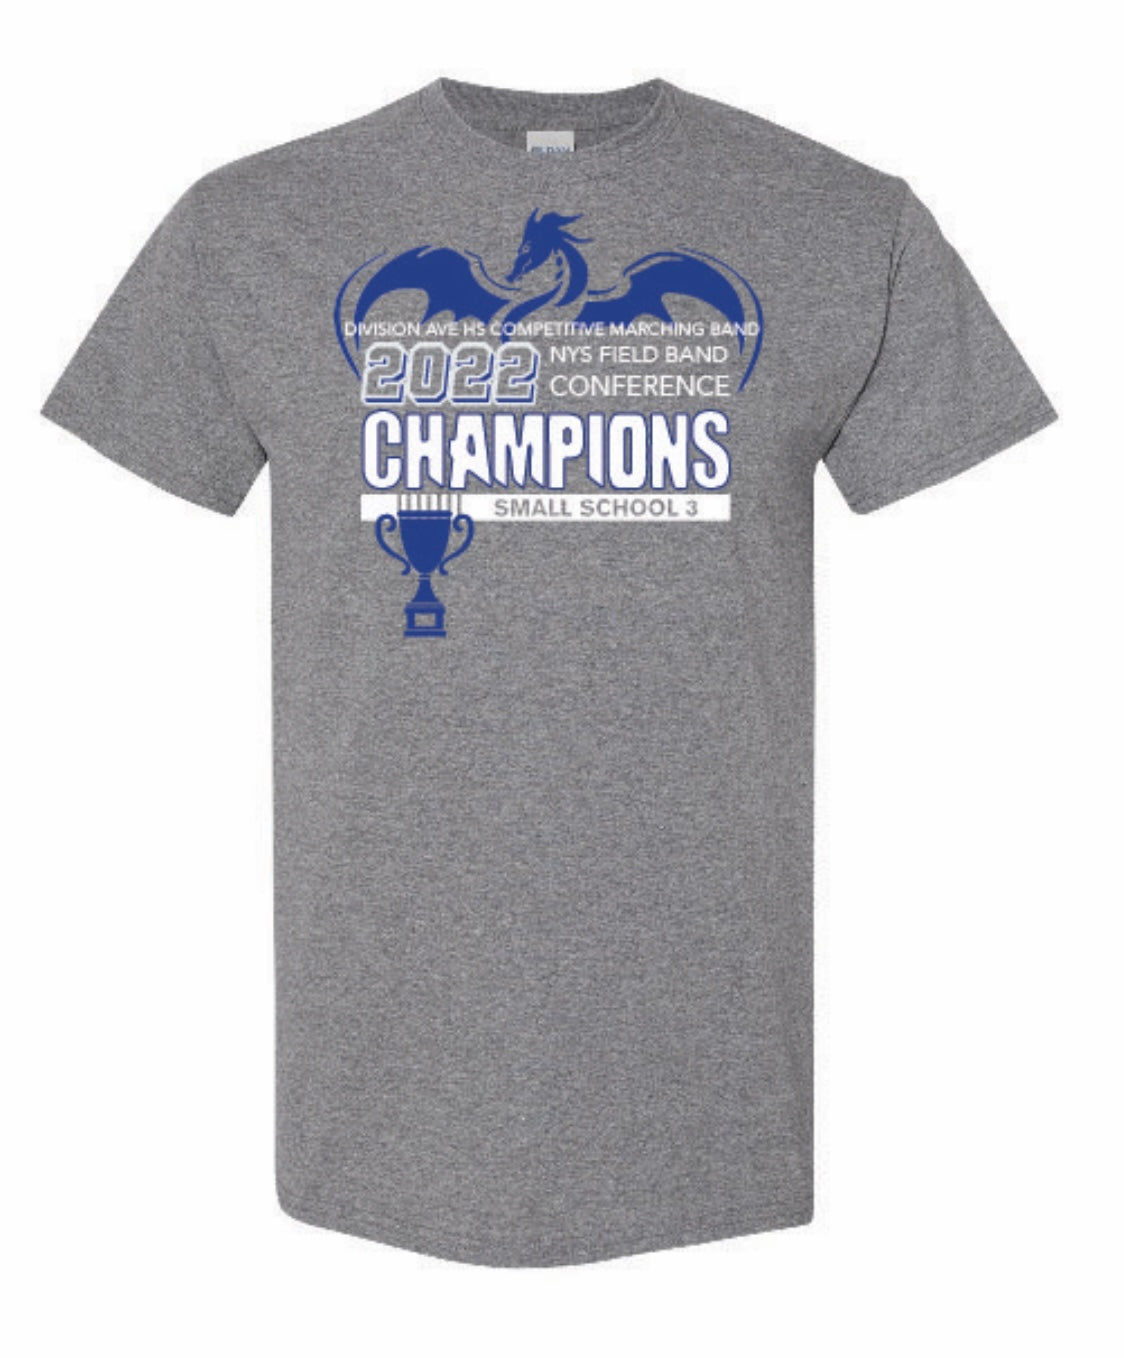 Division Ave HS Marching Band Championship T-Shirt